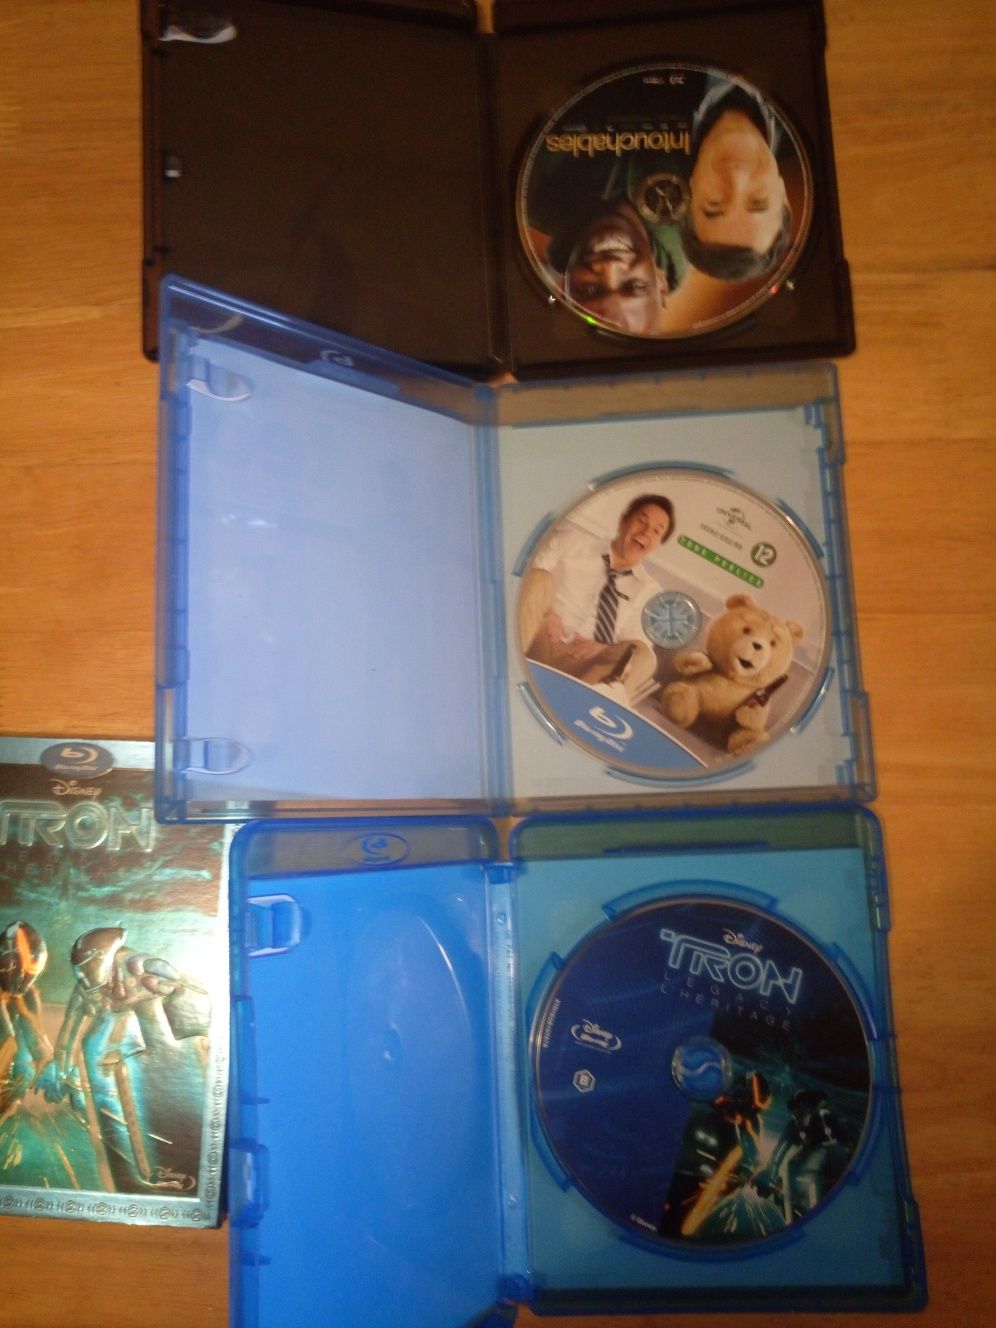 Blu-Ray Tron, Ted e Intouchables